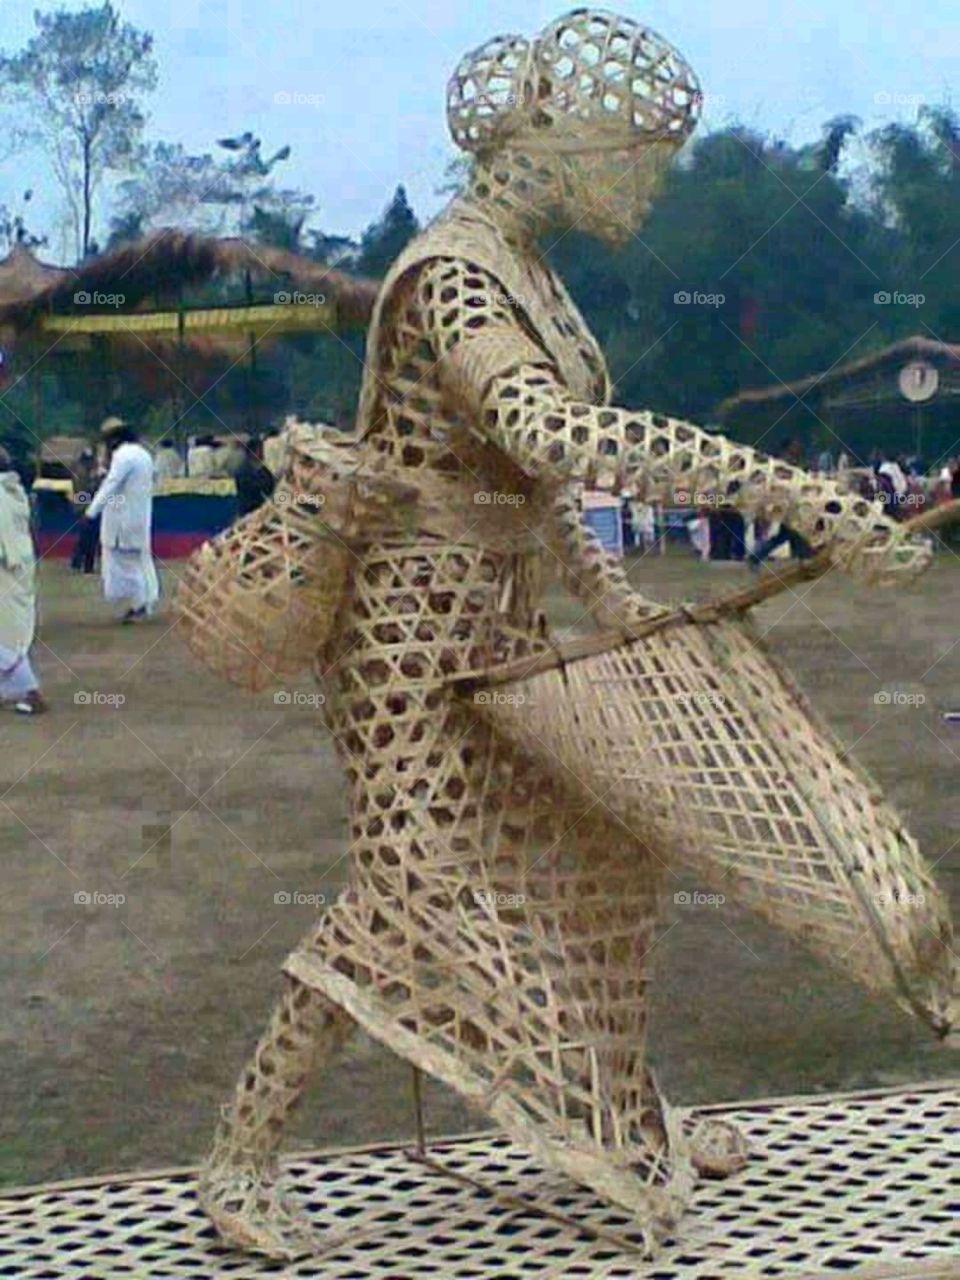 Woven from creative rattan